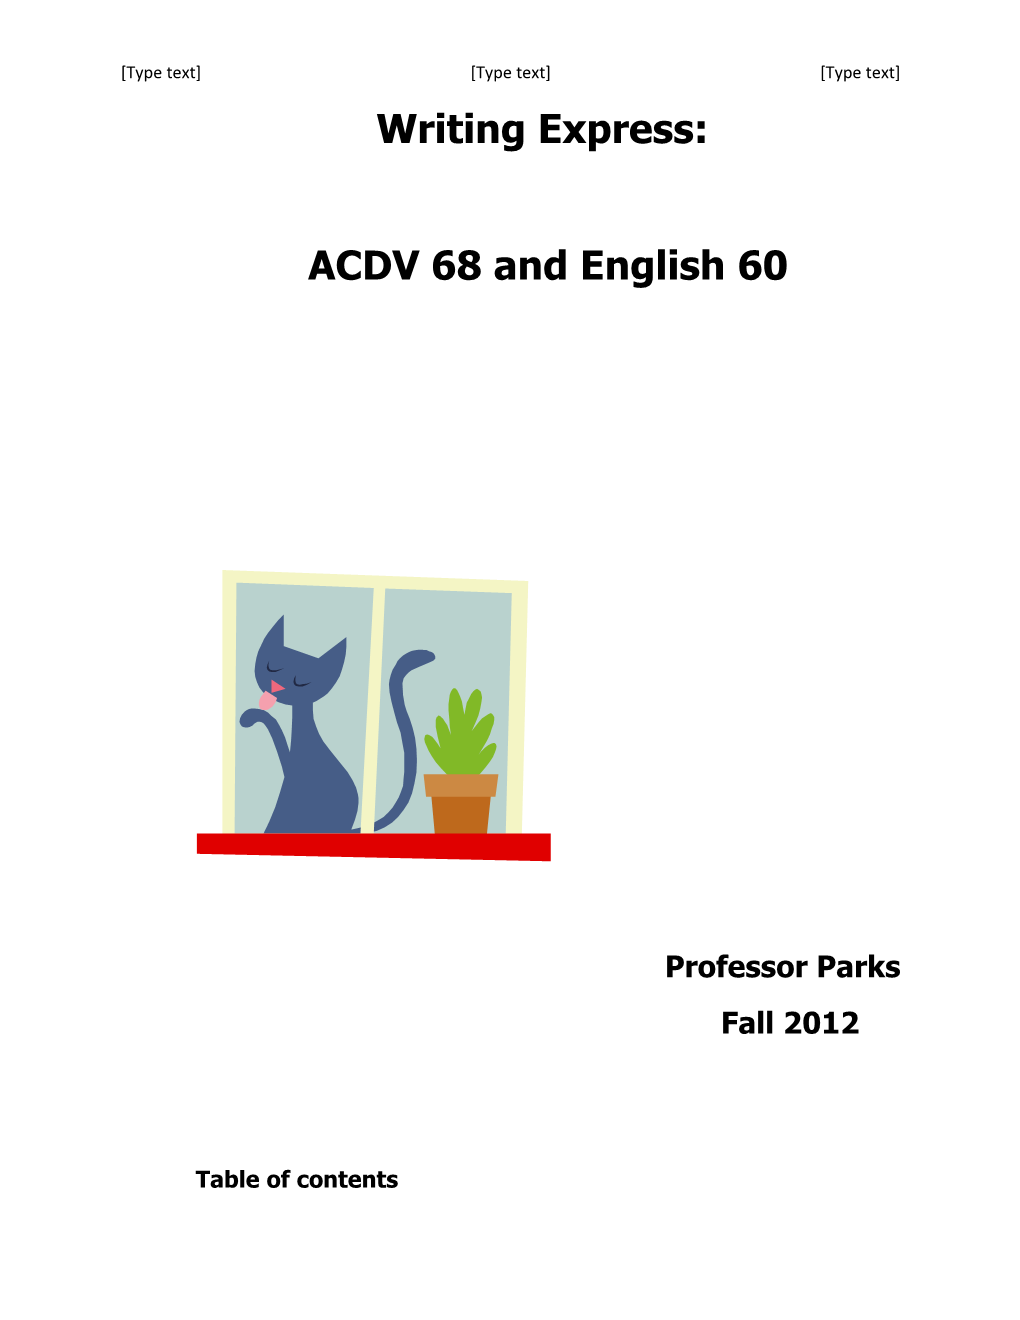 Professor Parks ACDV 68 and English 60 Page 322